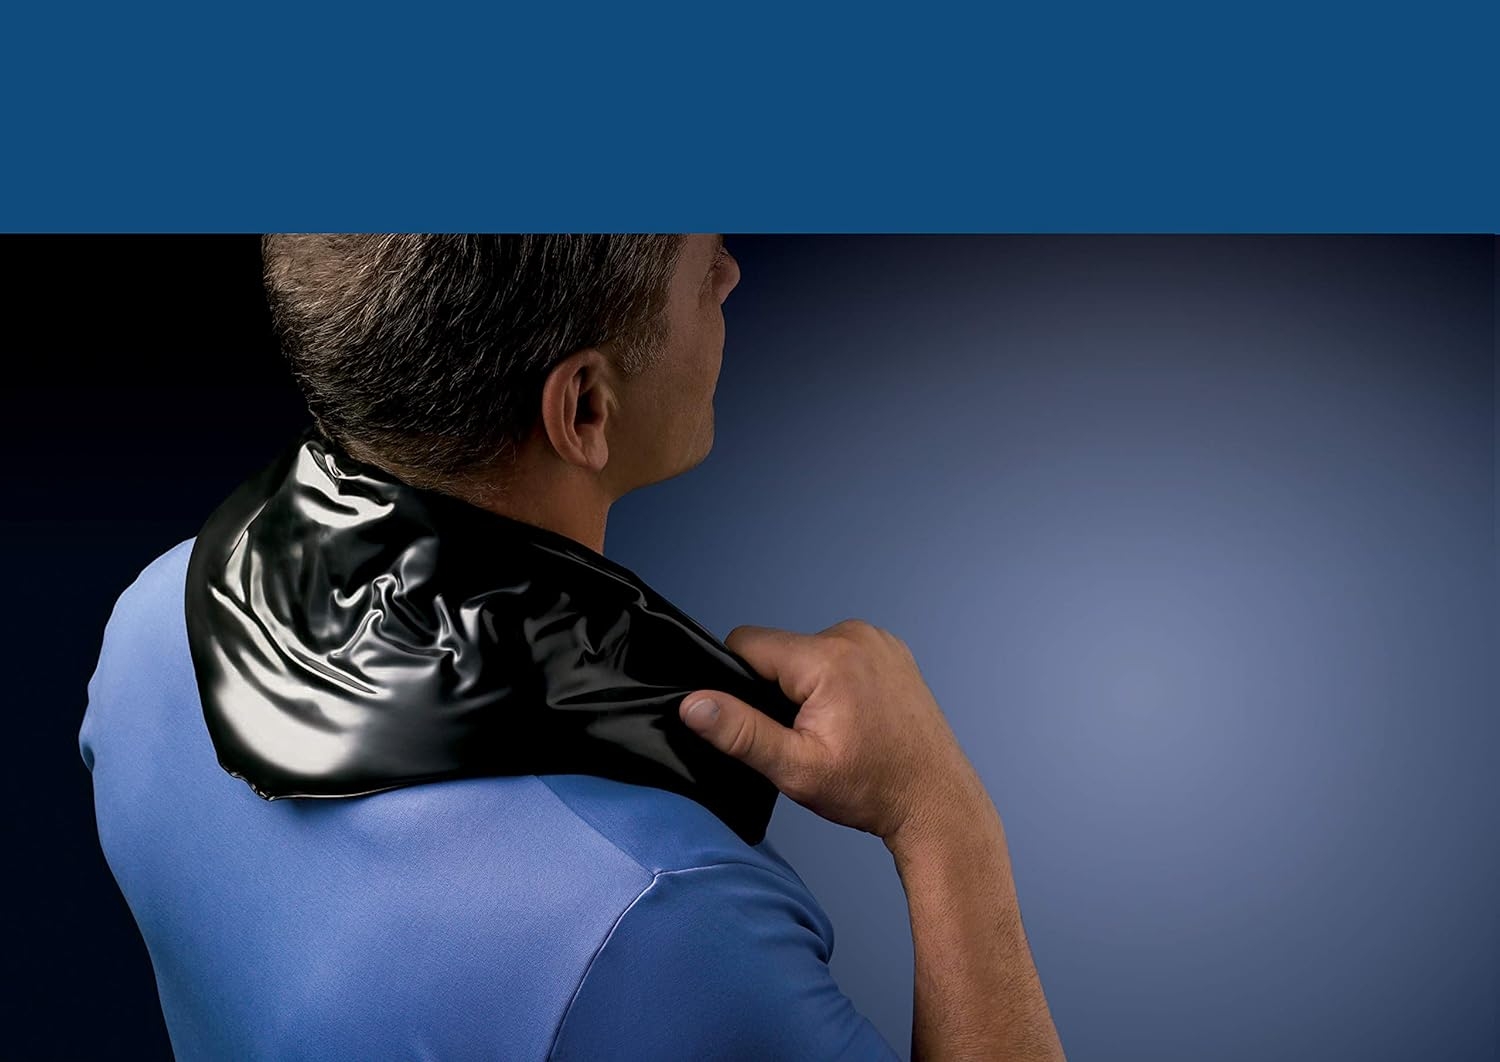 Back Support Systems Professional Cold Pack - Professional Medical Grade for All Injuries (6"x 23" Hot & Cold Pack)